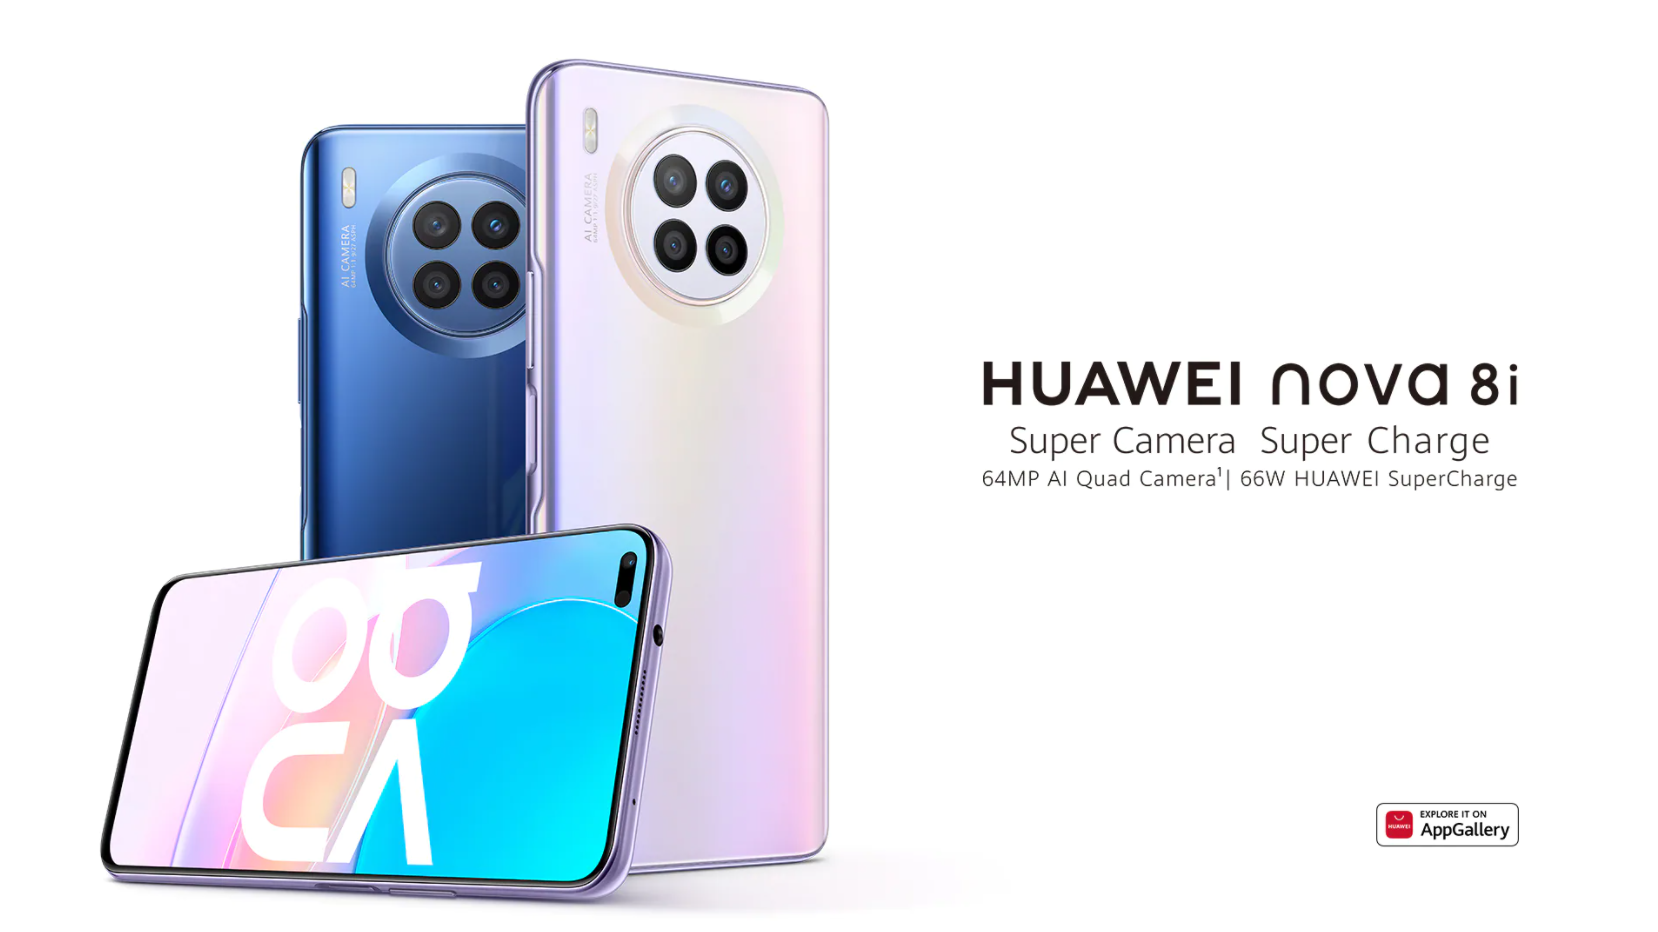 Huawei Reveals Some Specifications And Images Of Nova 8i On Its Official Website